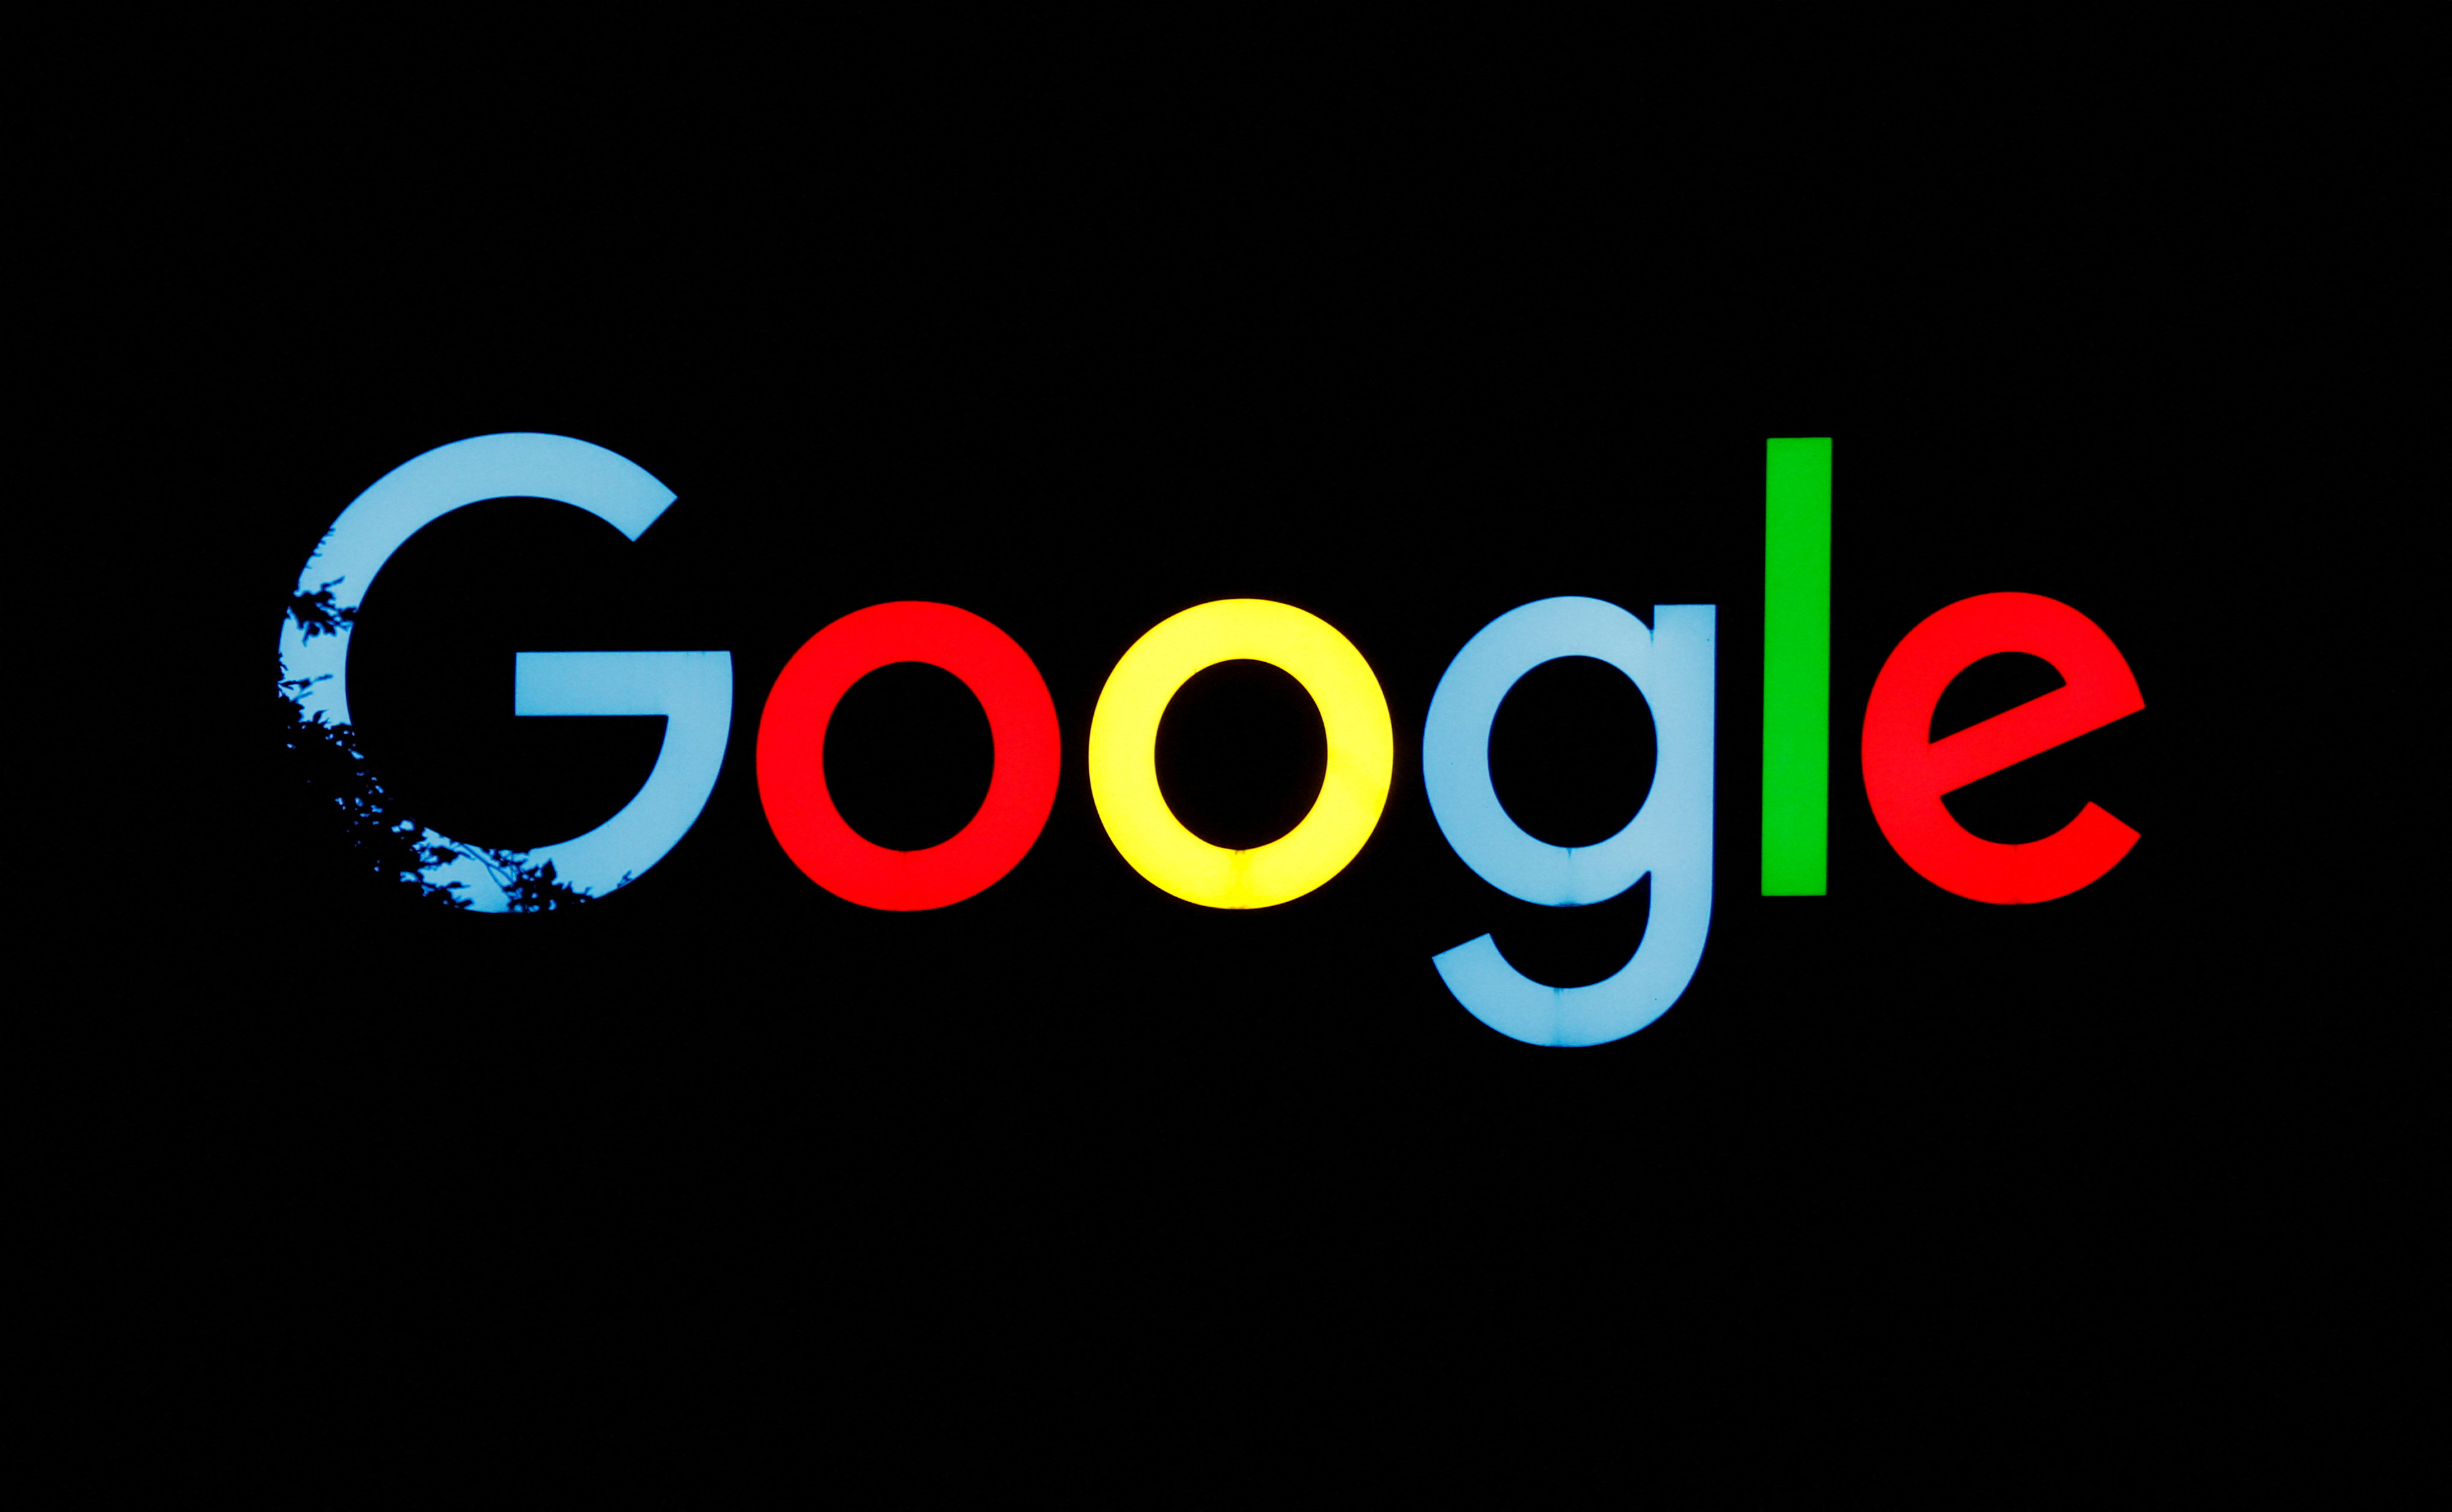 Google gives a glimpse of its antitrust trial defence